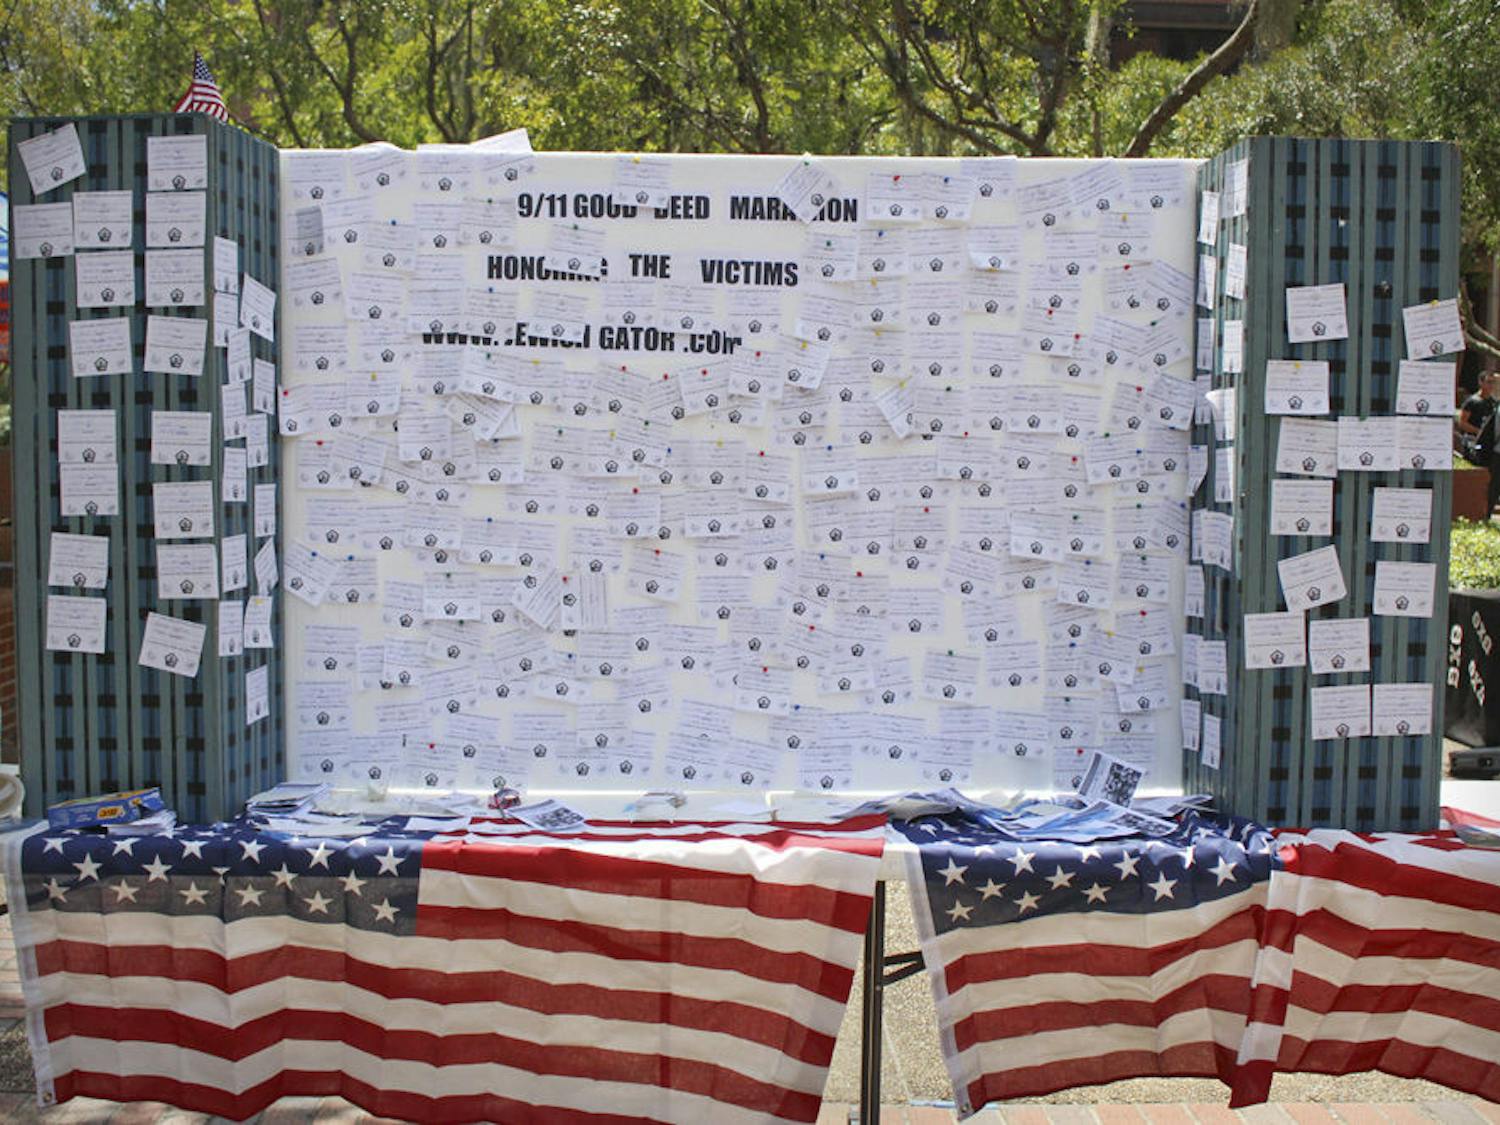 Lubavitch-Chabad Jewish Student Center and the Lubavitch-Chabad Student Group setup a memorial board and replica twin towers for the Sept. 11 victims in Turlington Plaza Friday. Representatives of the Center and club urged students to write down good deeds on slips of paper and attach them to the display.